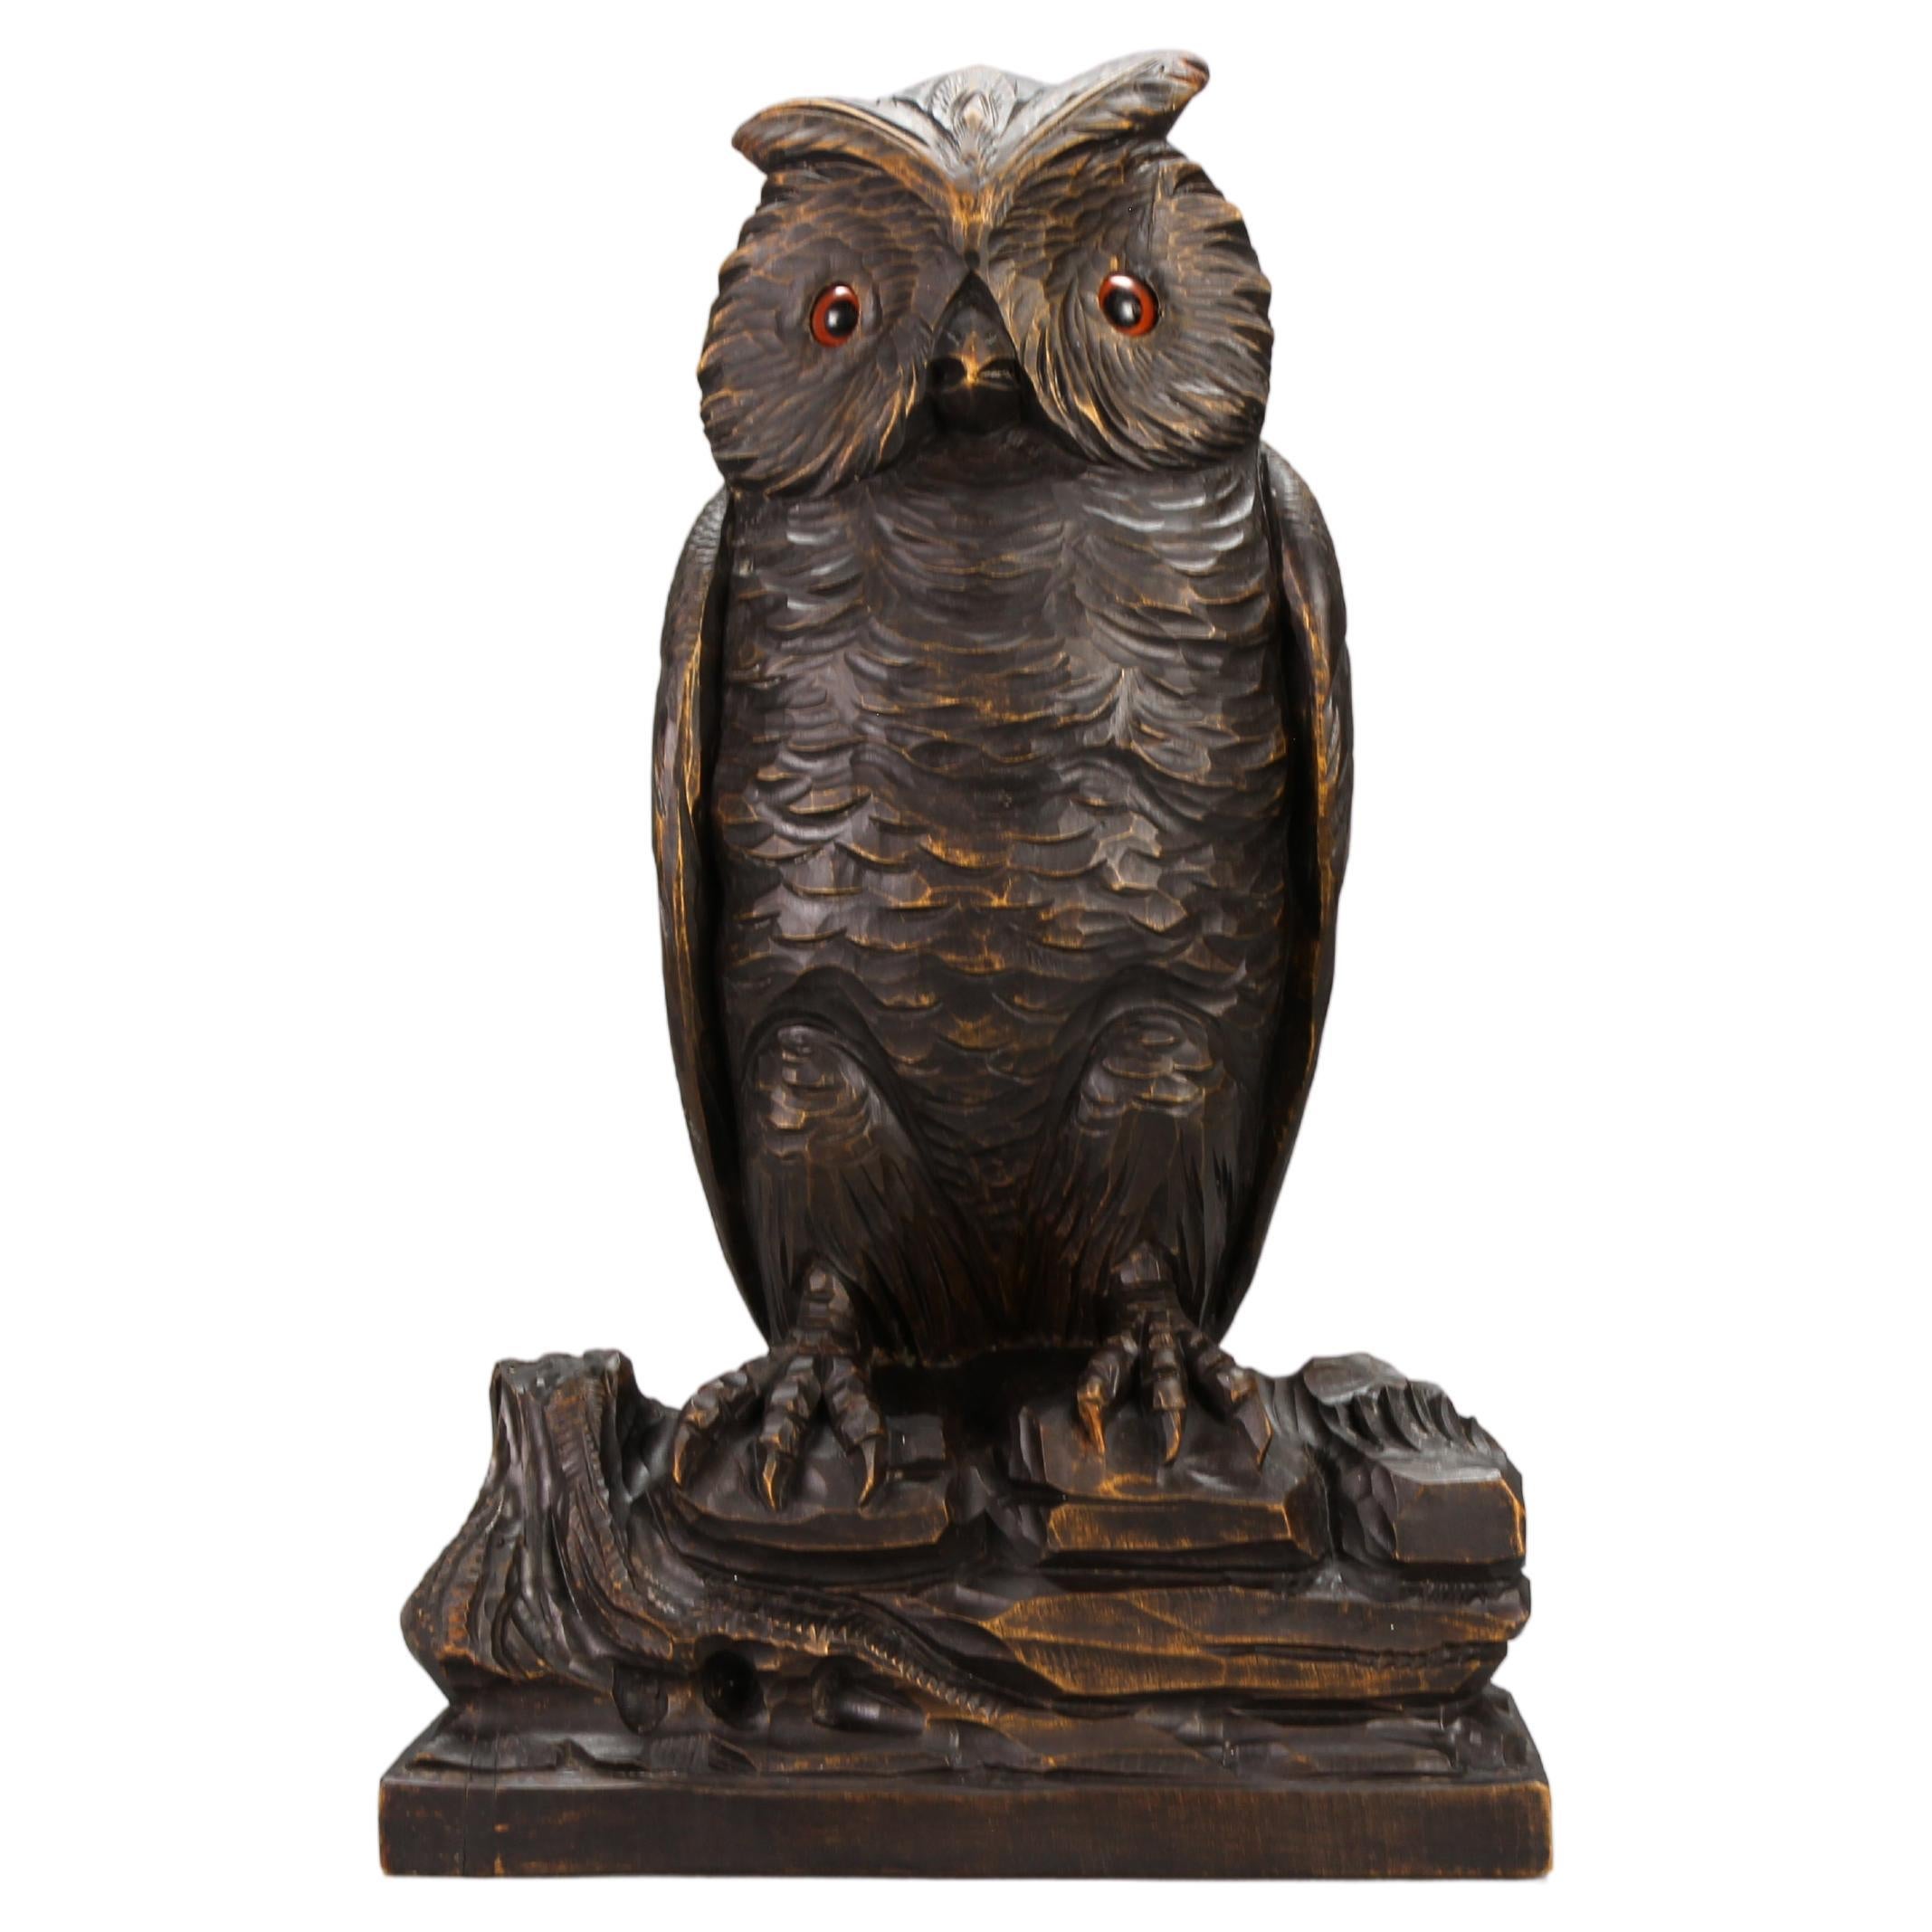 Antique German Black Forest Style Carved Owl Sculpture with Glass Eyes, ca. 1920 For Sale